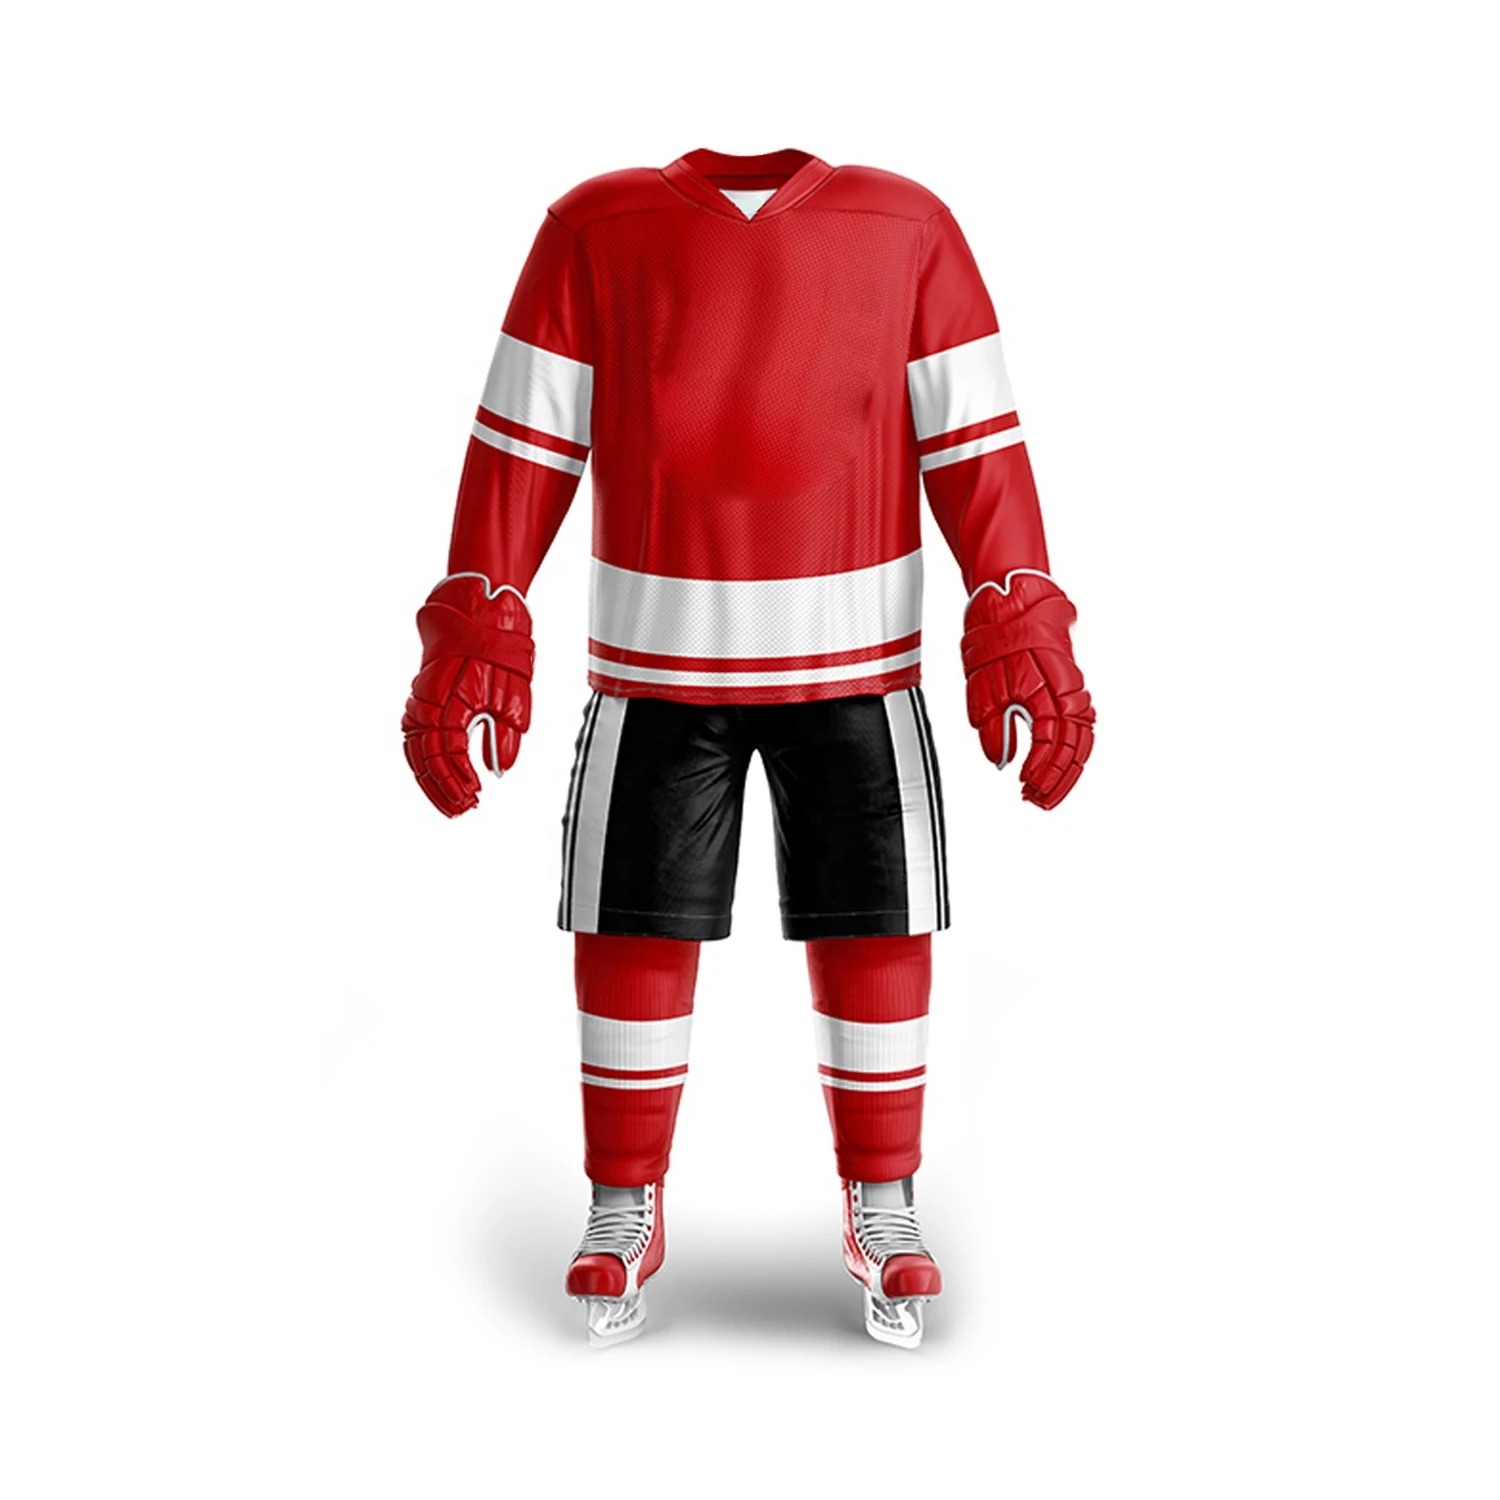 Icepack Blackout #23 Hockey Jersey – Red and White Shop